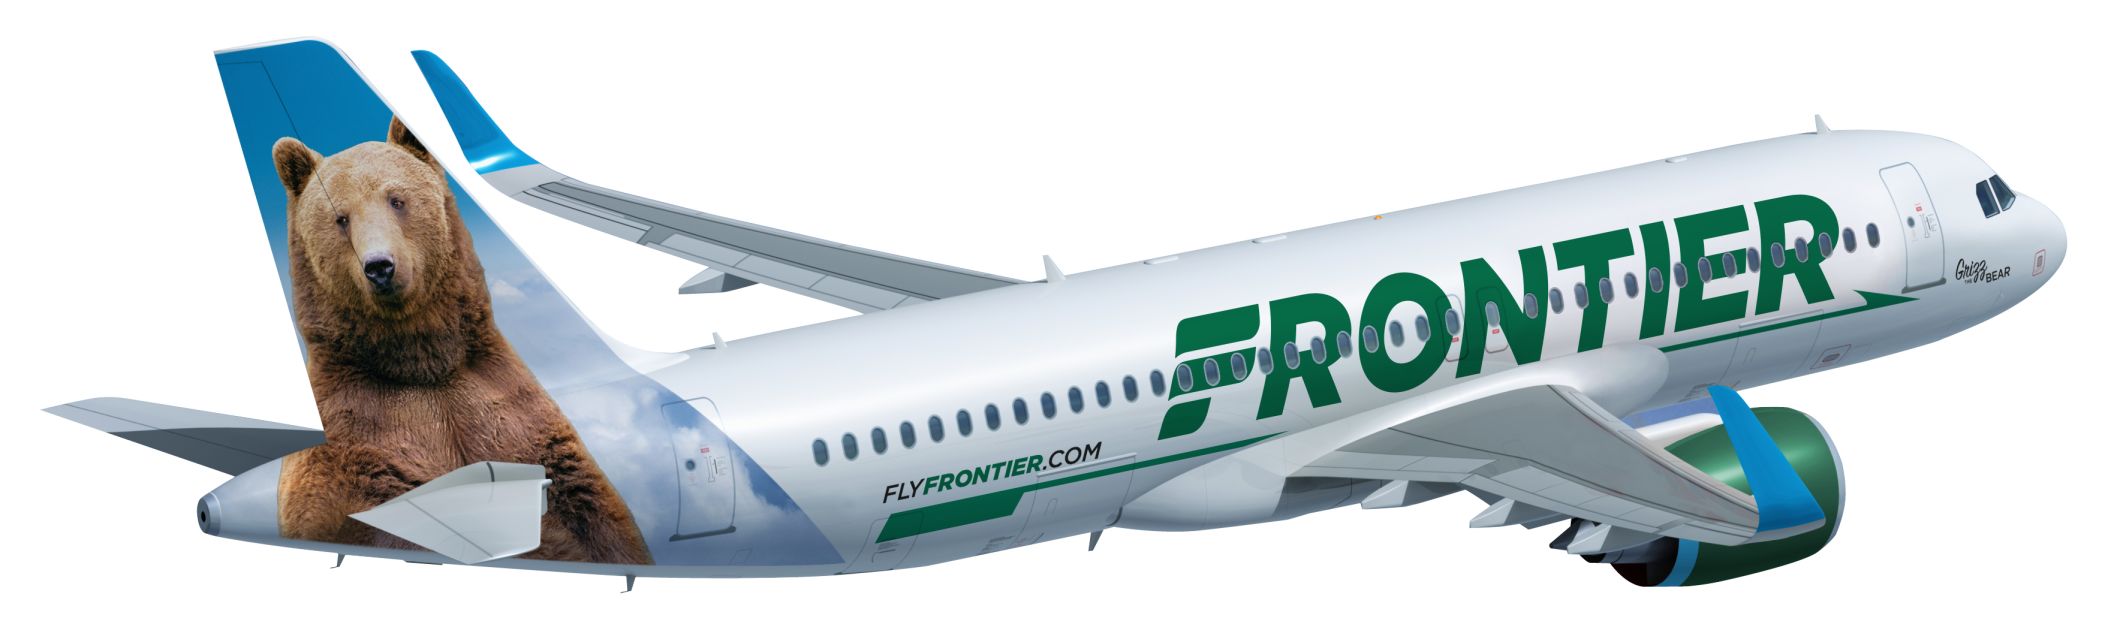 Frontier Airlines redesigned its fleet as well in 2014. The trademark array of animals on the tail have remained, though the carrier has reverted to an older version of the Frontier logo. Both Southwest's and Frontier's redesigns were leaked on Twitter ahead of the official announcements.